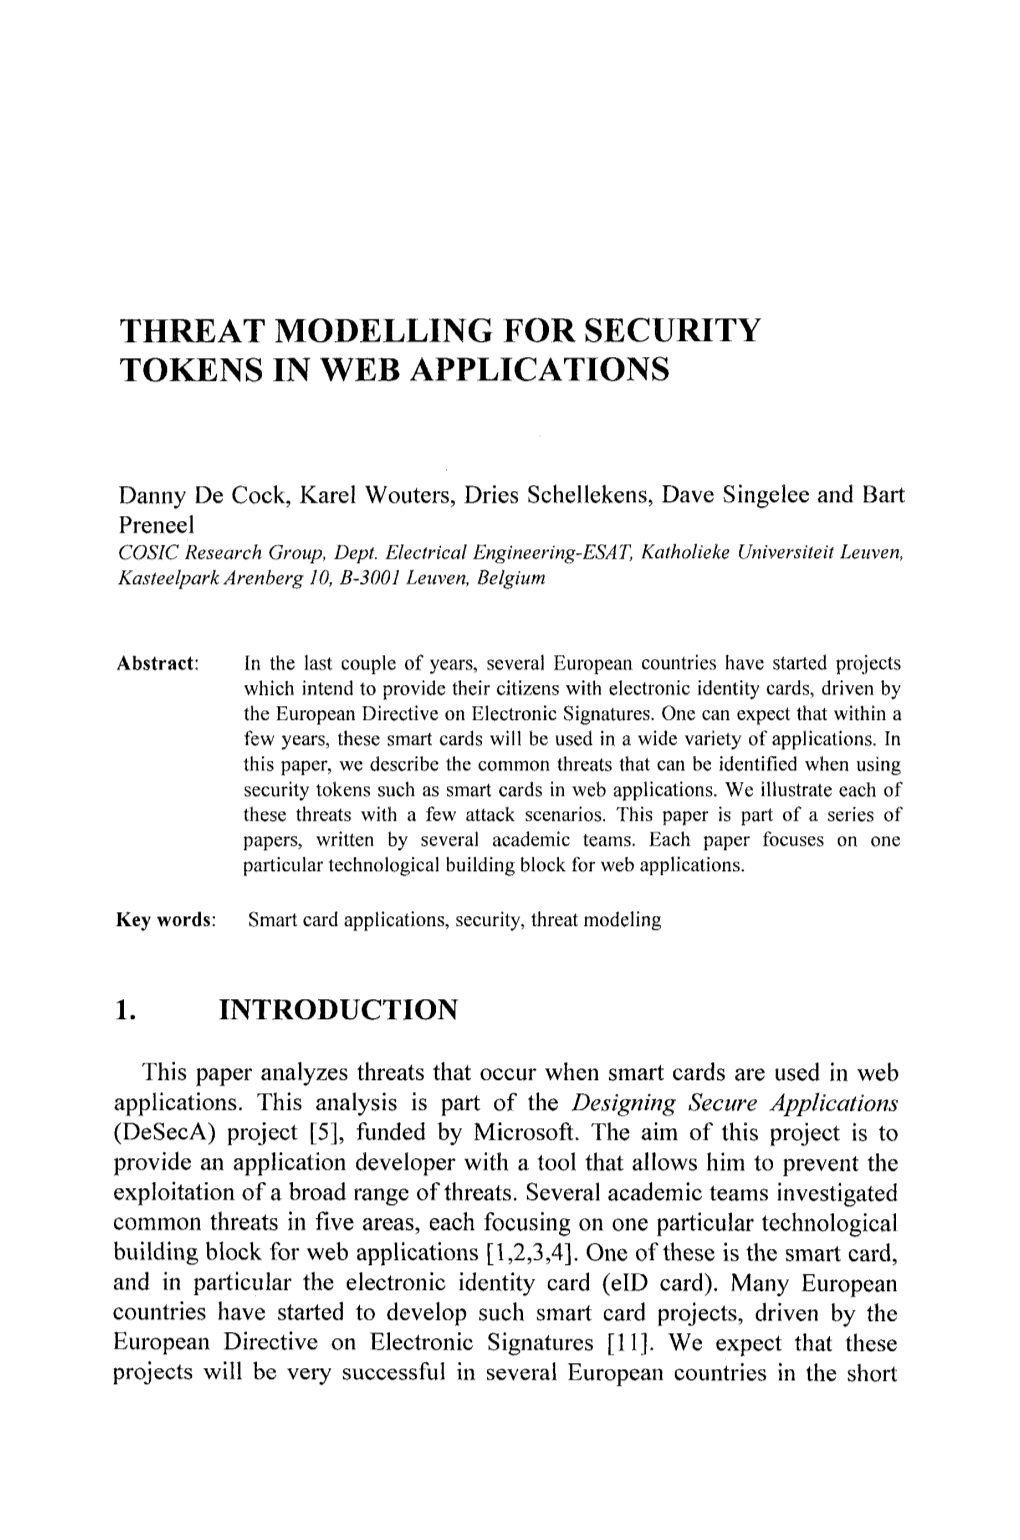 Threat Modelling for Security Tokens in Web Applications